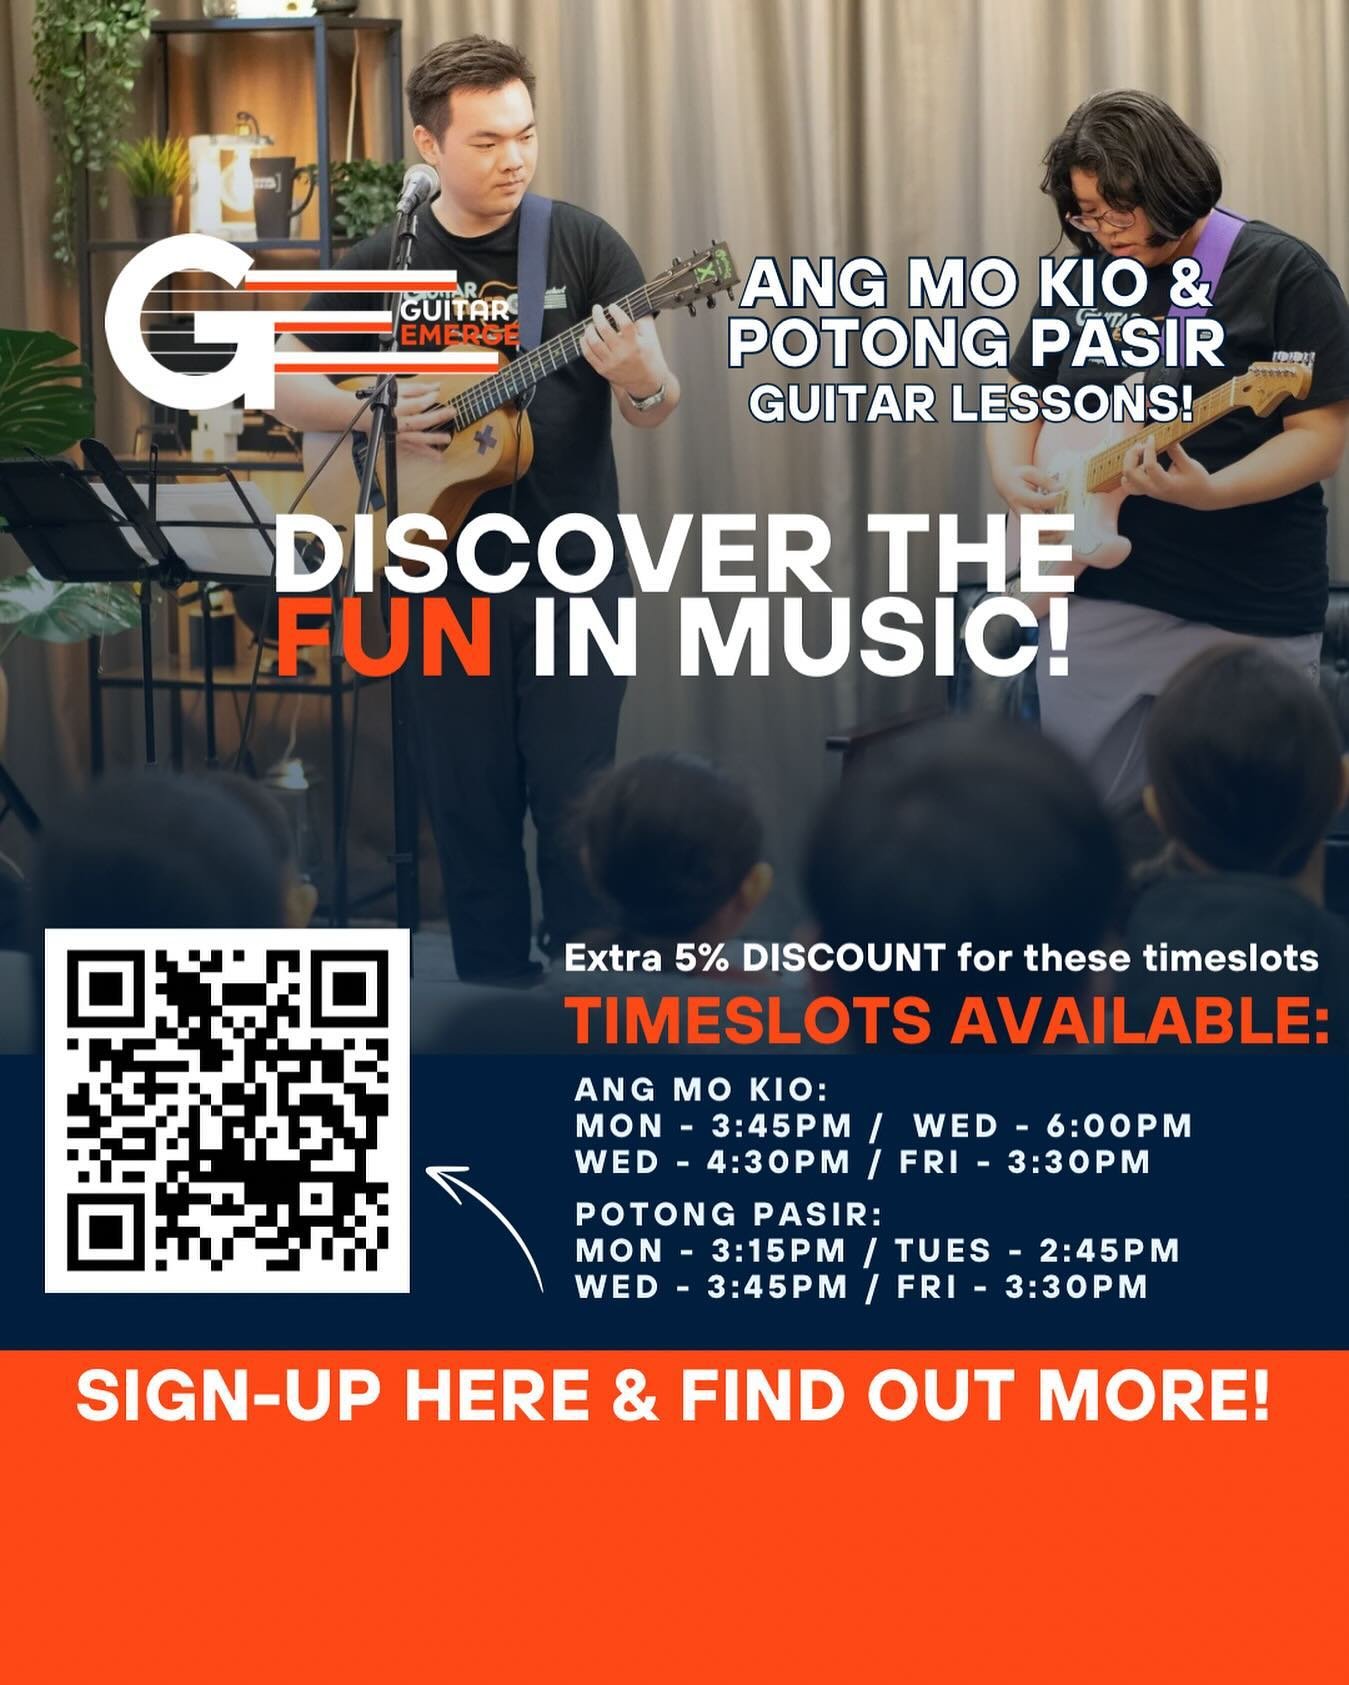 Music is FUN when you know what are your goals! Join us for 1 TO 1 Guitar Lessons, we have experienced teachers who will guide you into reaching your potential as a guitarist! We are looking motivated and easy-going students, beginner or looking to i